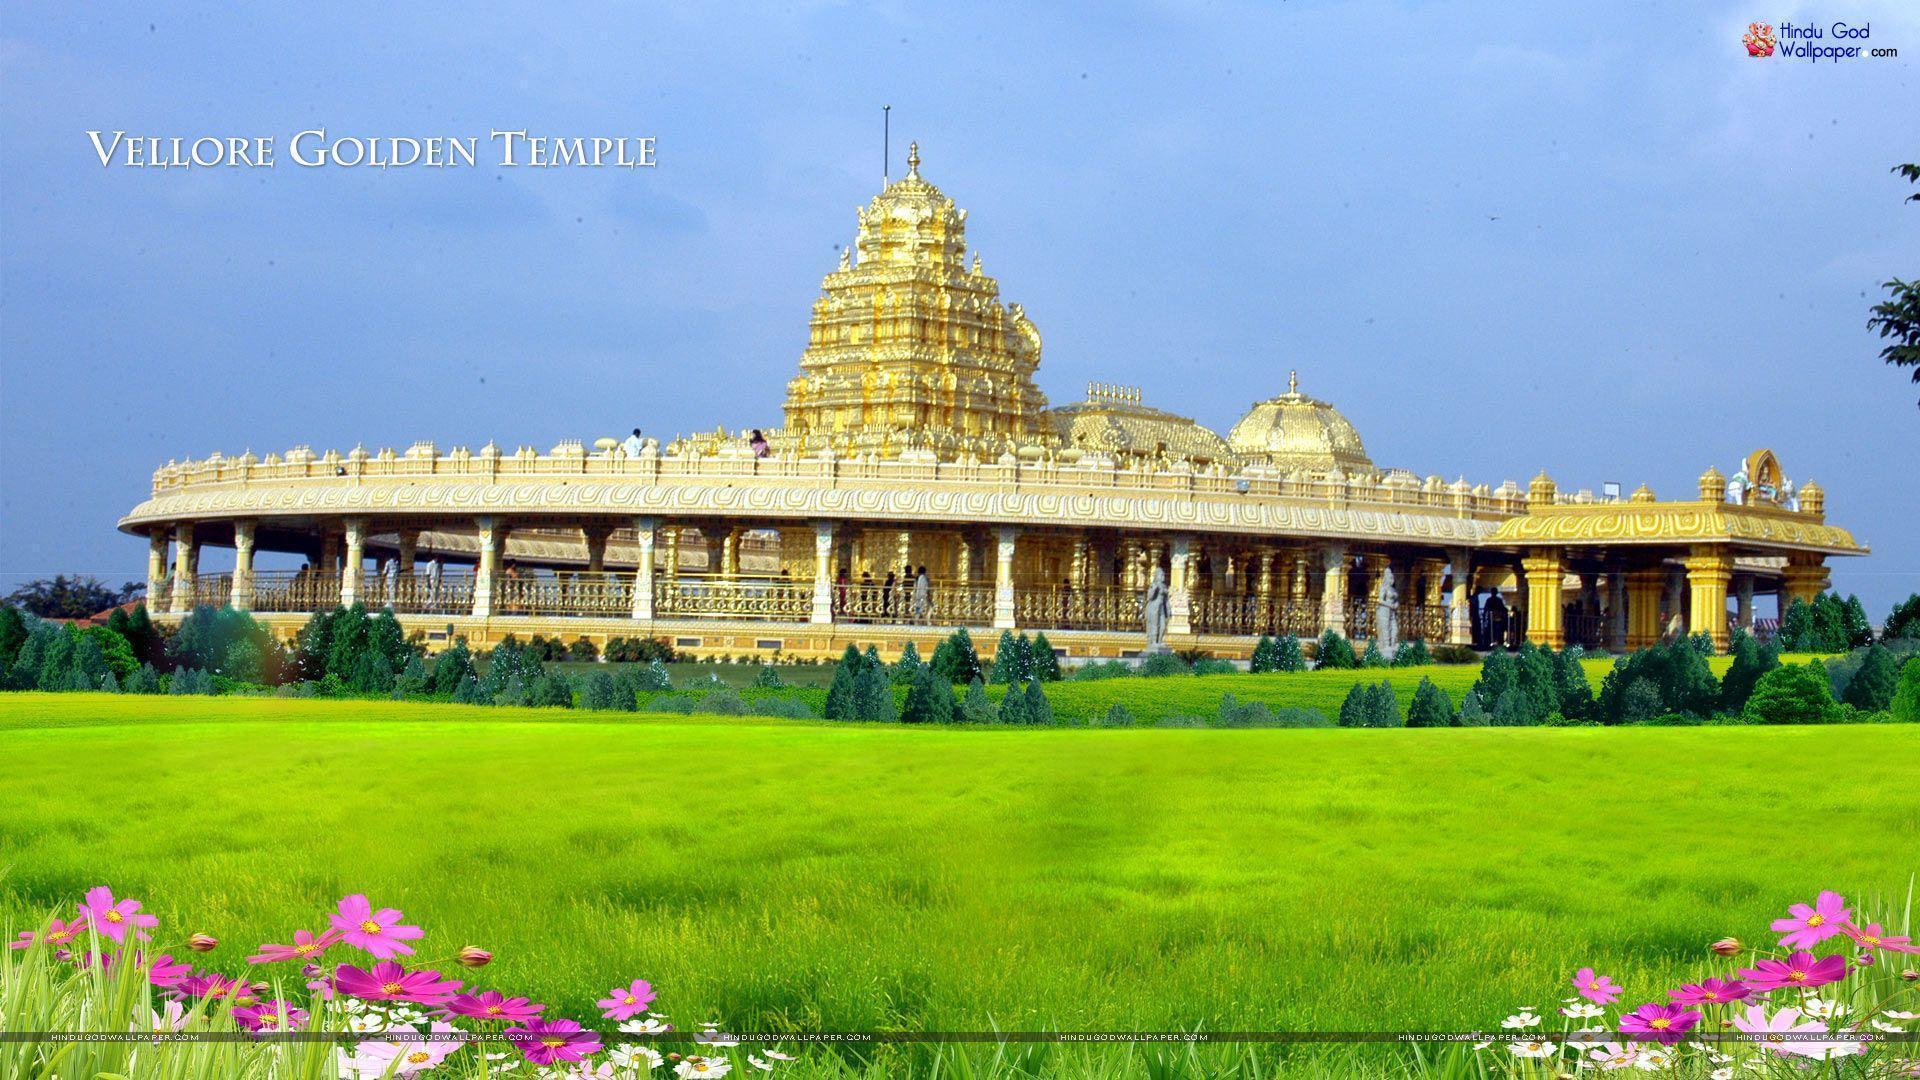 Vellore Golden Temple Wallpapers, Photos, Image Download